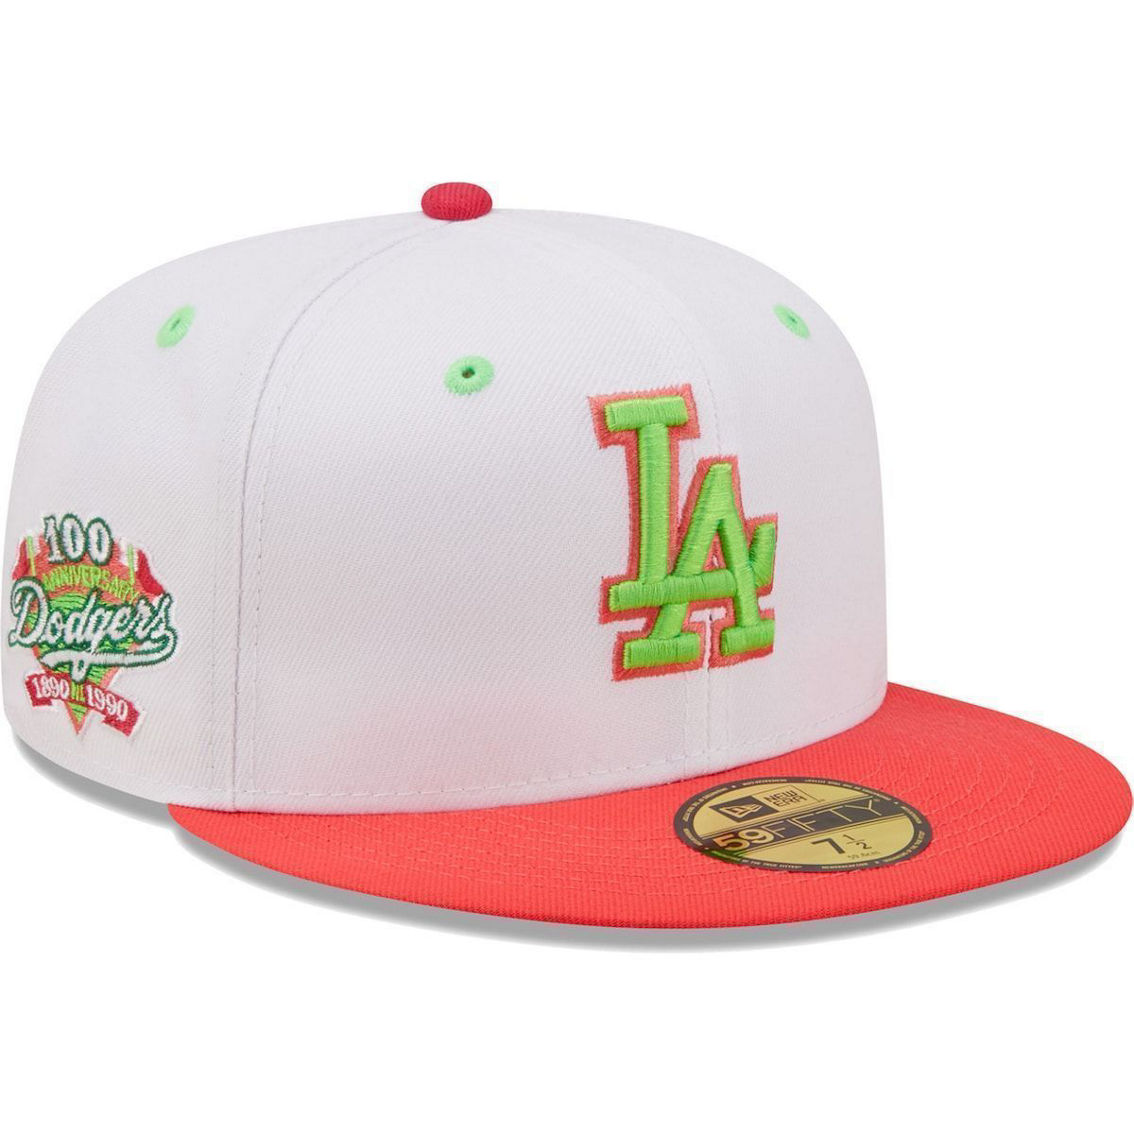 New Era Men's White/Coral Los Angeles Dodgers 100th Anniversary Strawberry Lolli 59FIFTY Fitted Hat - Image 2 of 4